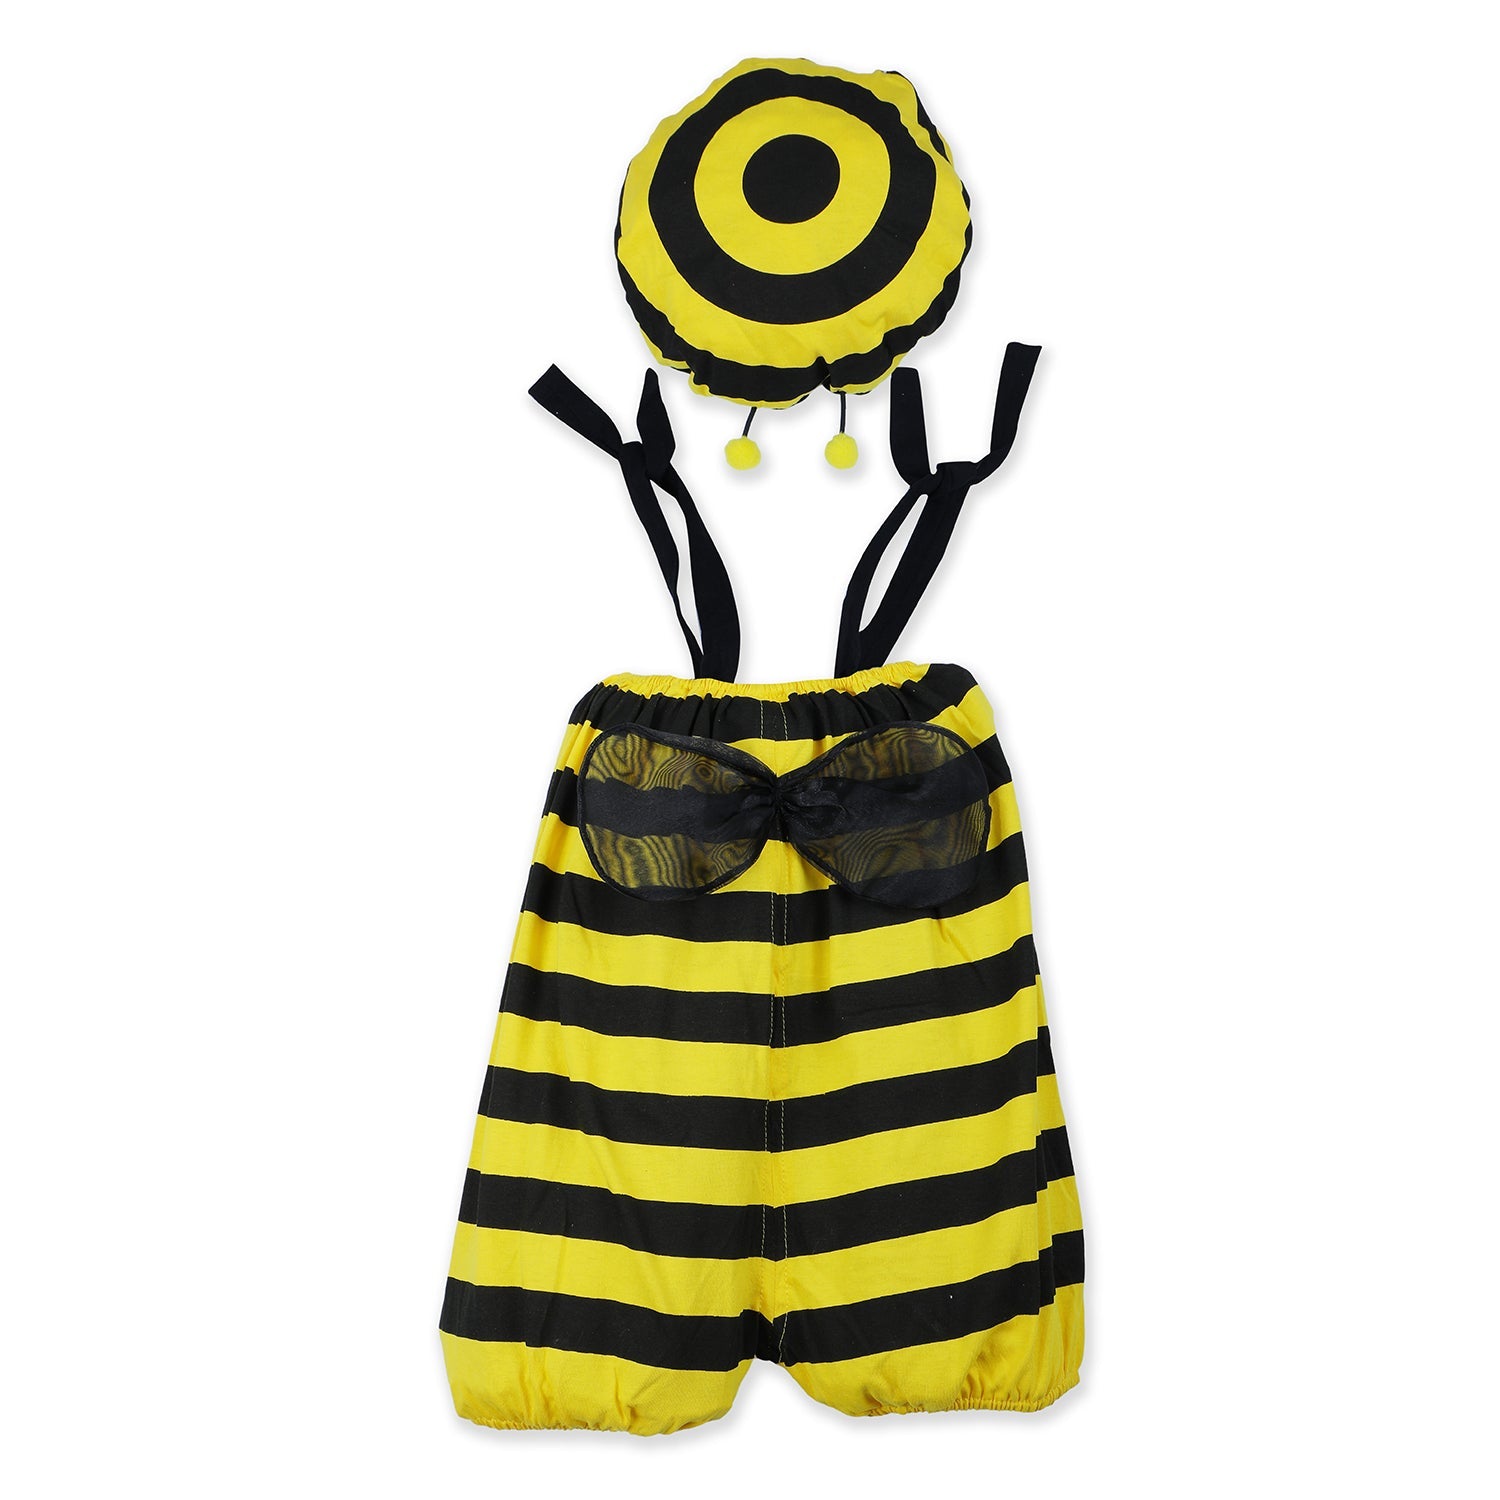 Baby Moo Bumble Bee Costume 2pcs Cap And Fancy Dress - Yellow - Baby Moo